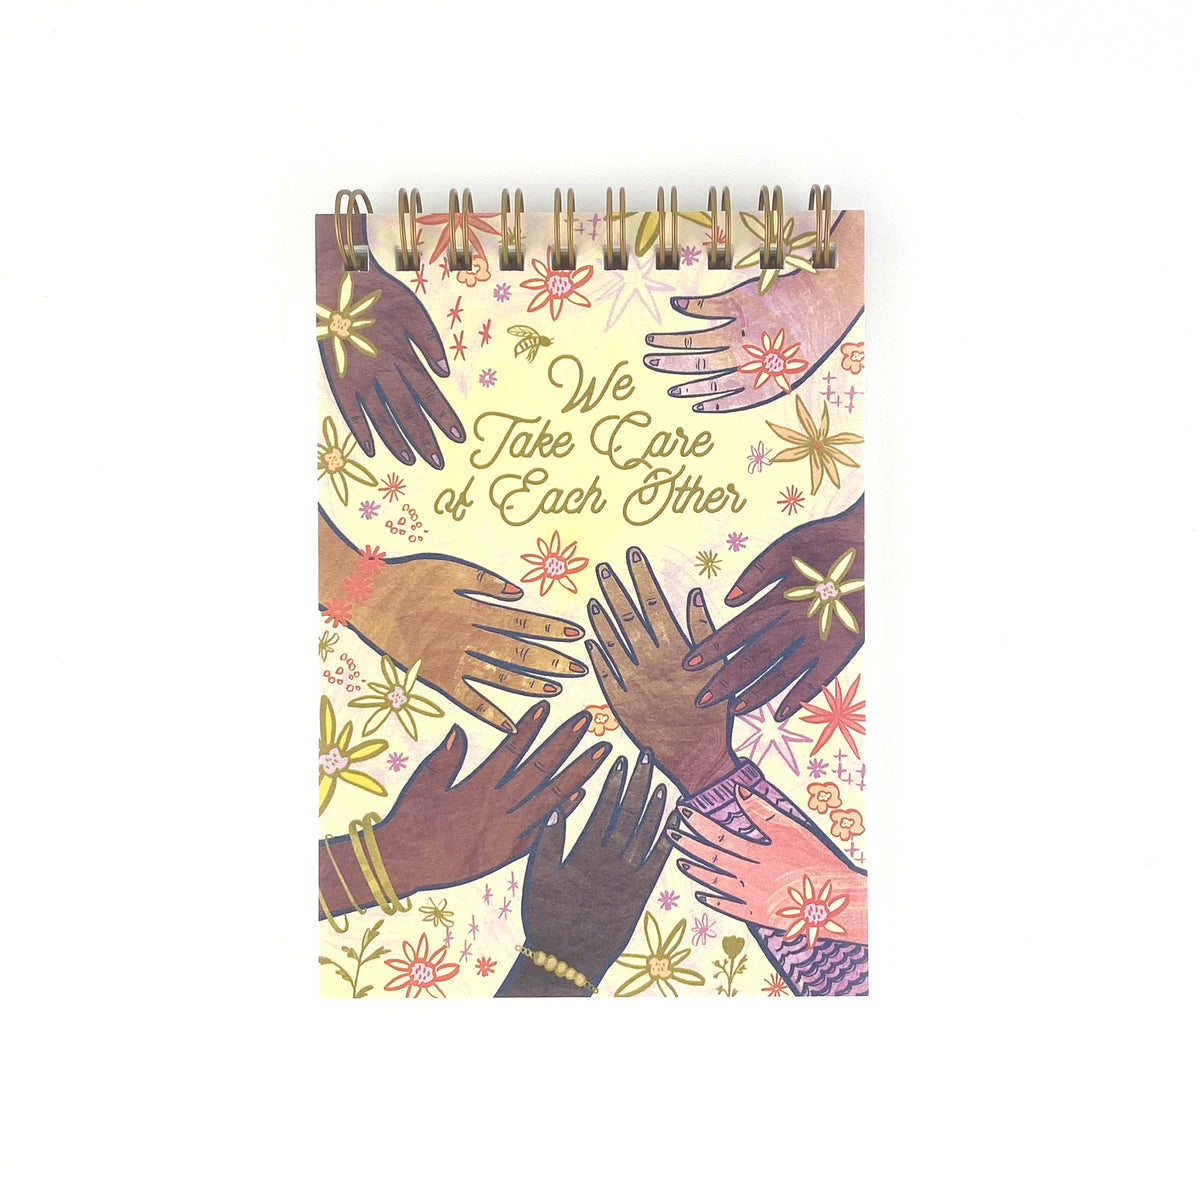 Spiral Bound notebook with hand drawn artwork of multi racial hands and flowers. In the center text says We Take Care of Each Other.